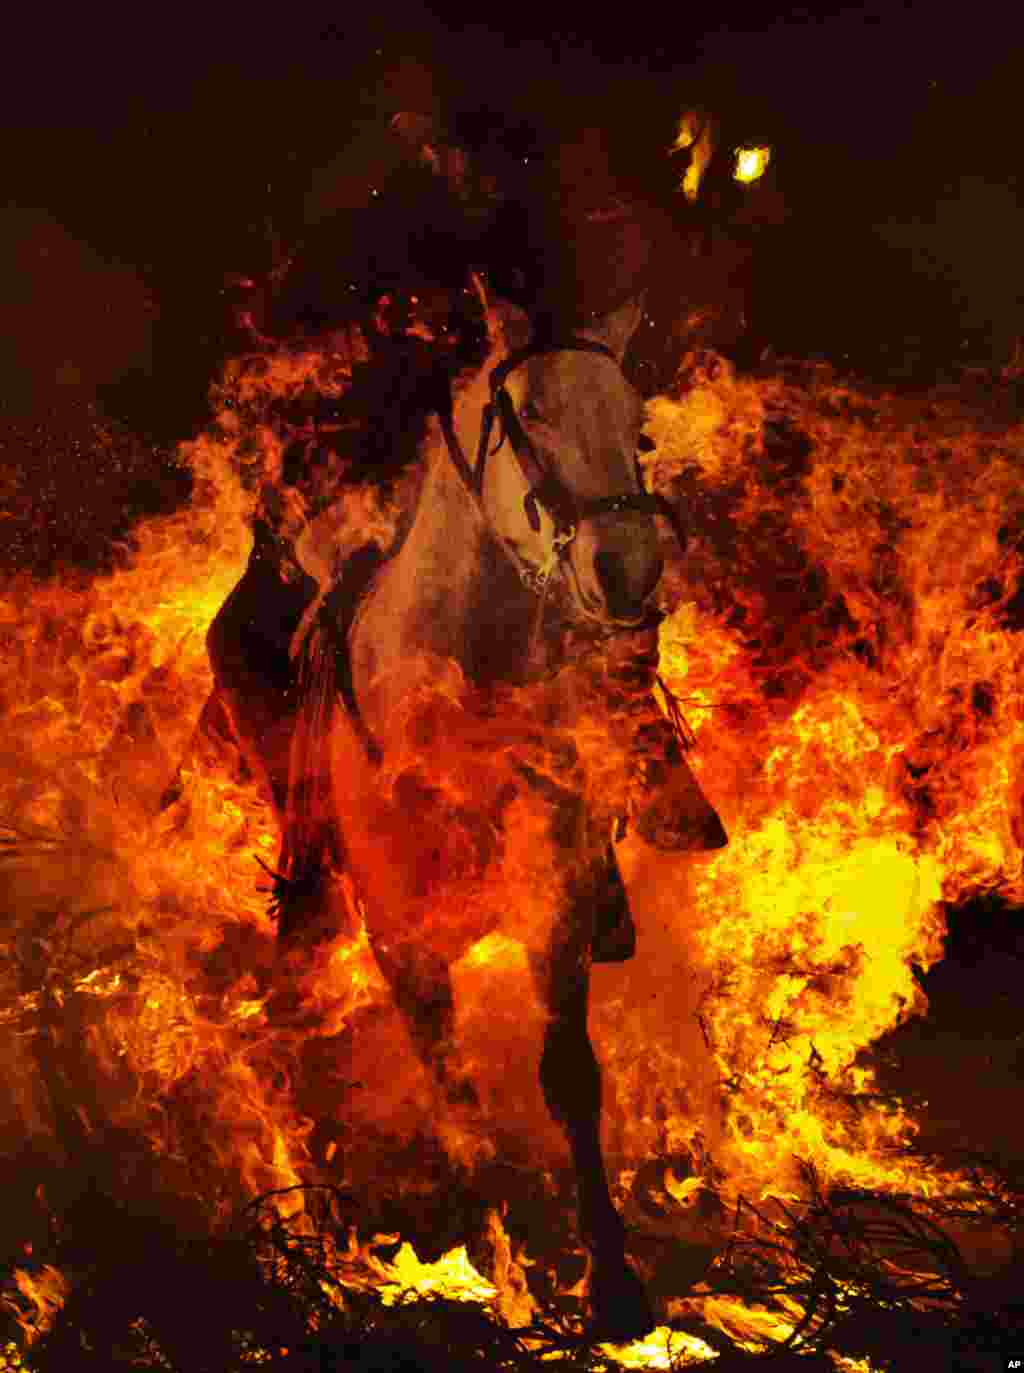 A man rides a horse through a bonfire in San Bartolome de Pinares, Spain, January 16, 2013, in honor of Saint Anthony, the patron saint of animals. 